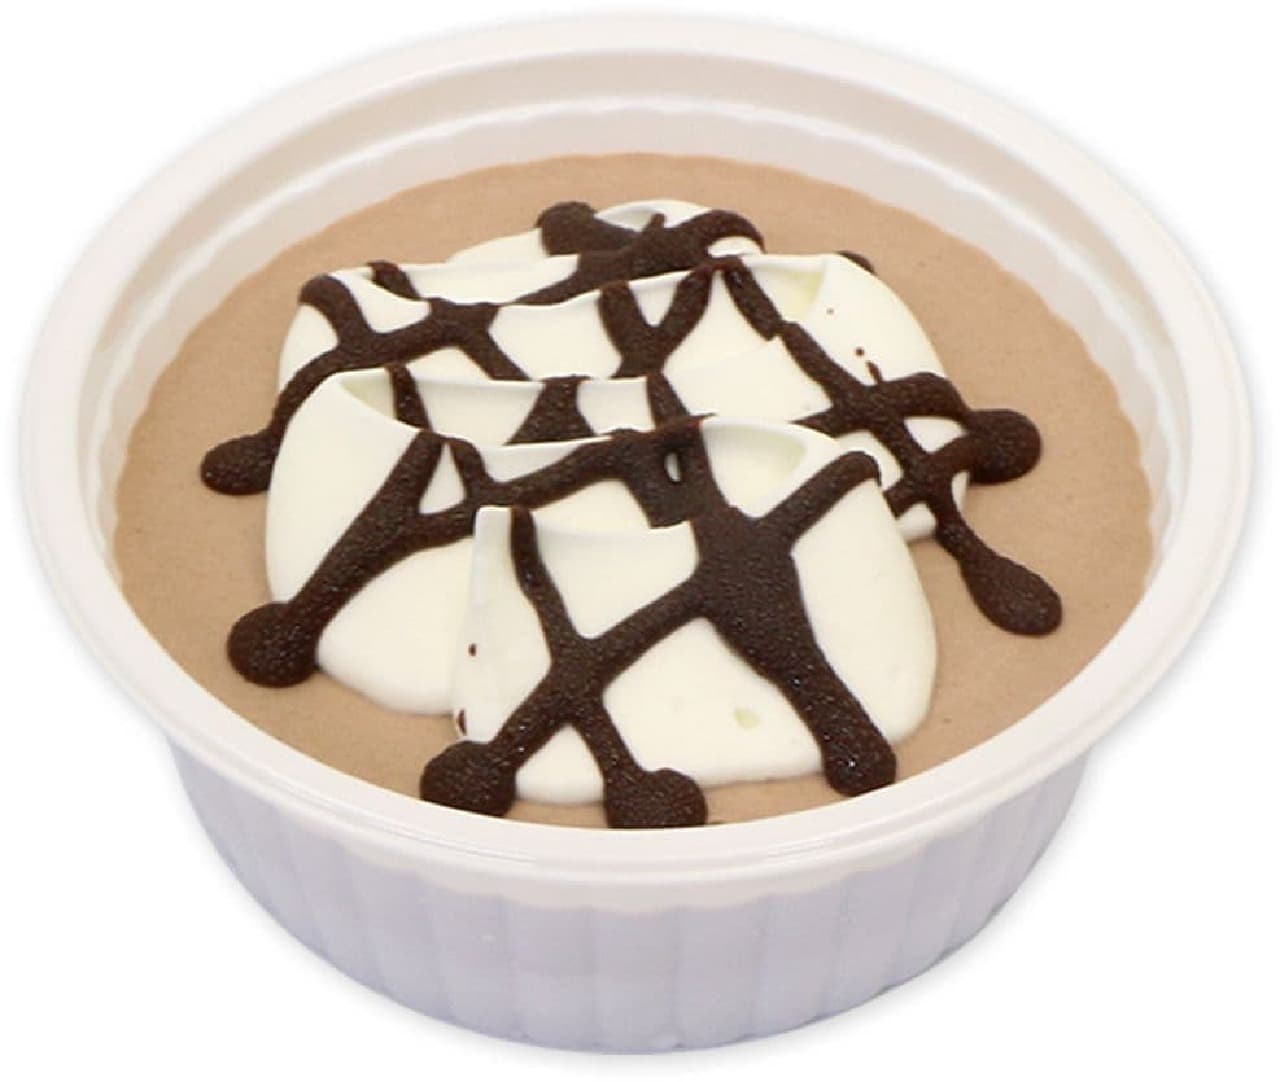 7-ELEVEN "Chocolat Fromage"